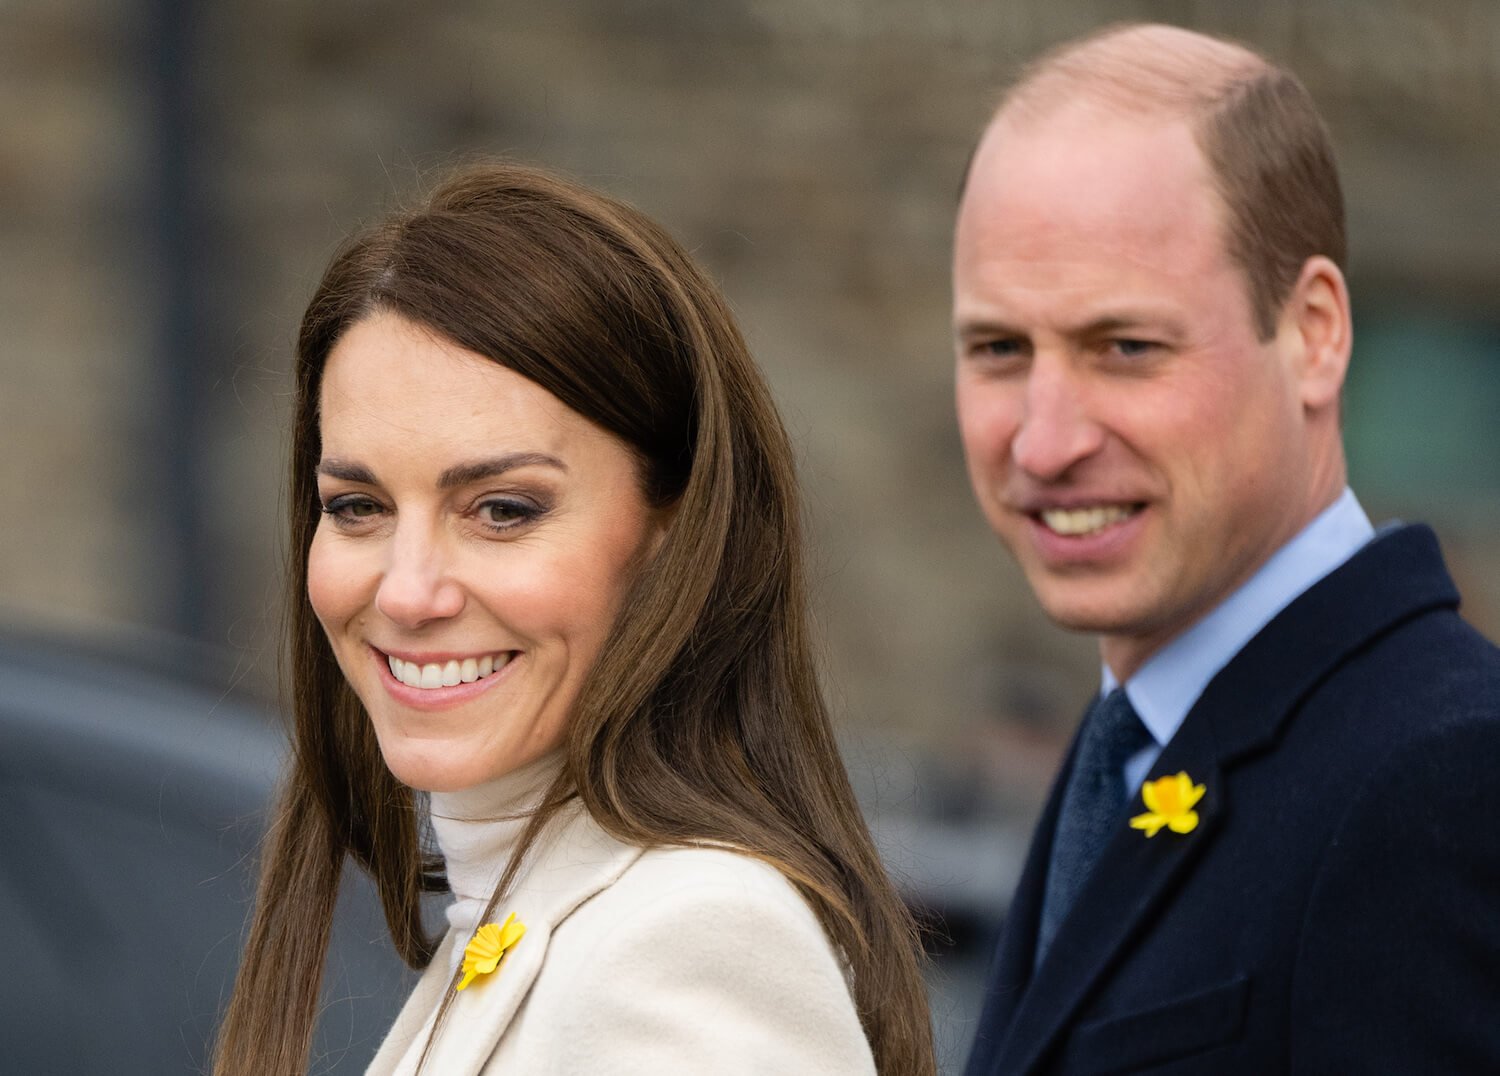 Kate Middleton body language at recent rugby match was more confident than Prince William